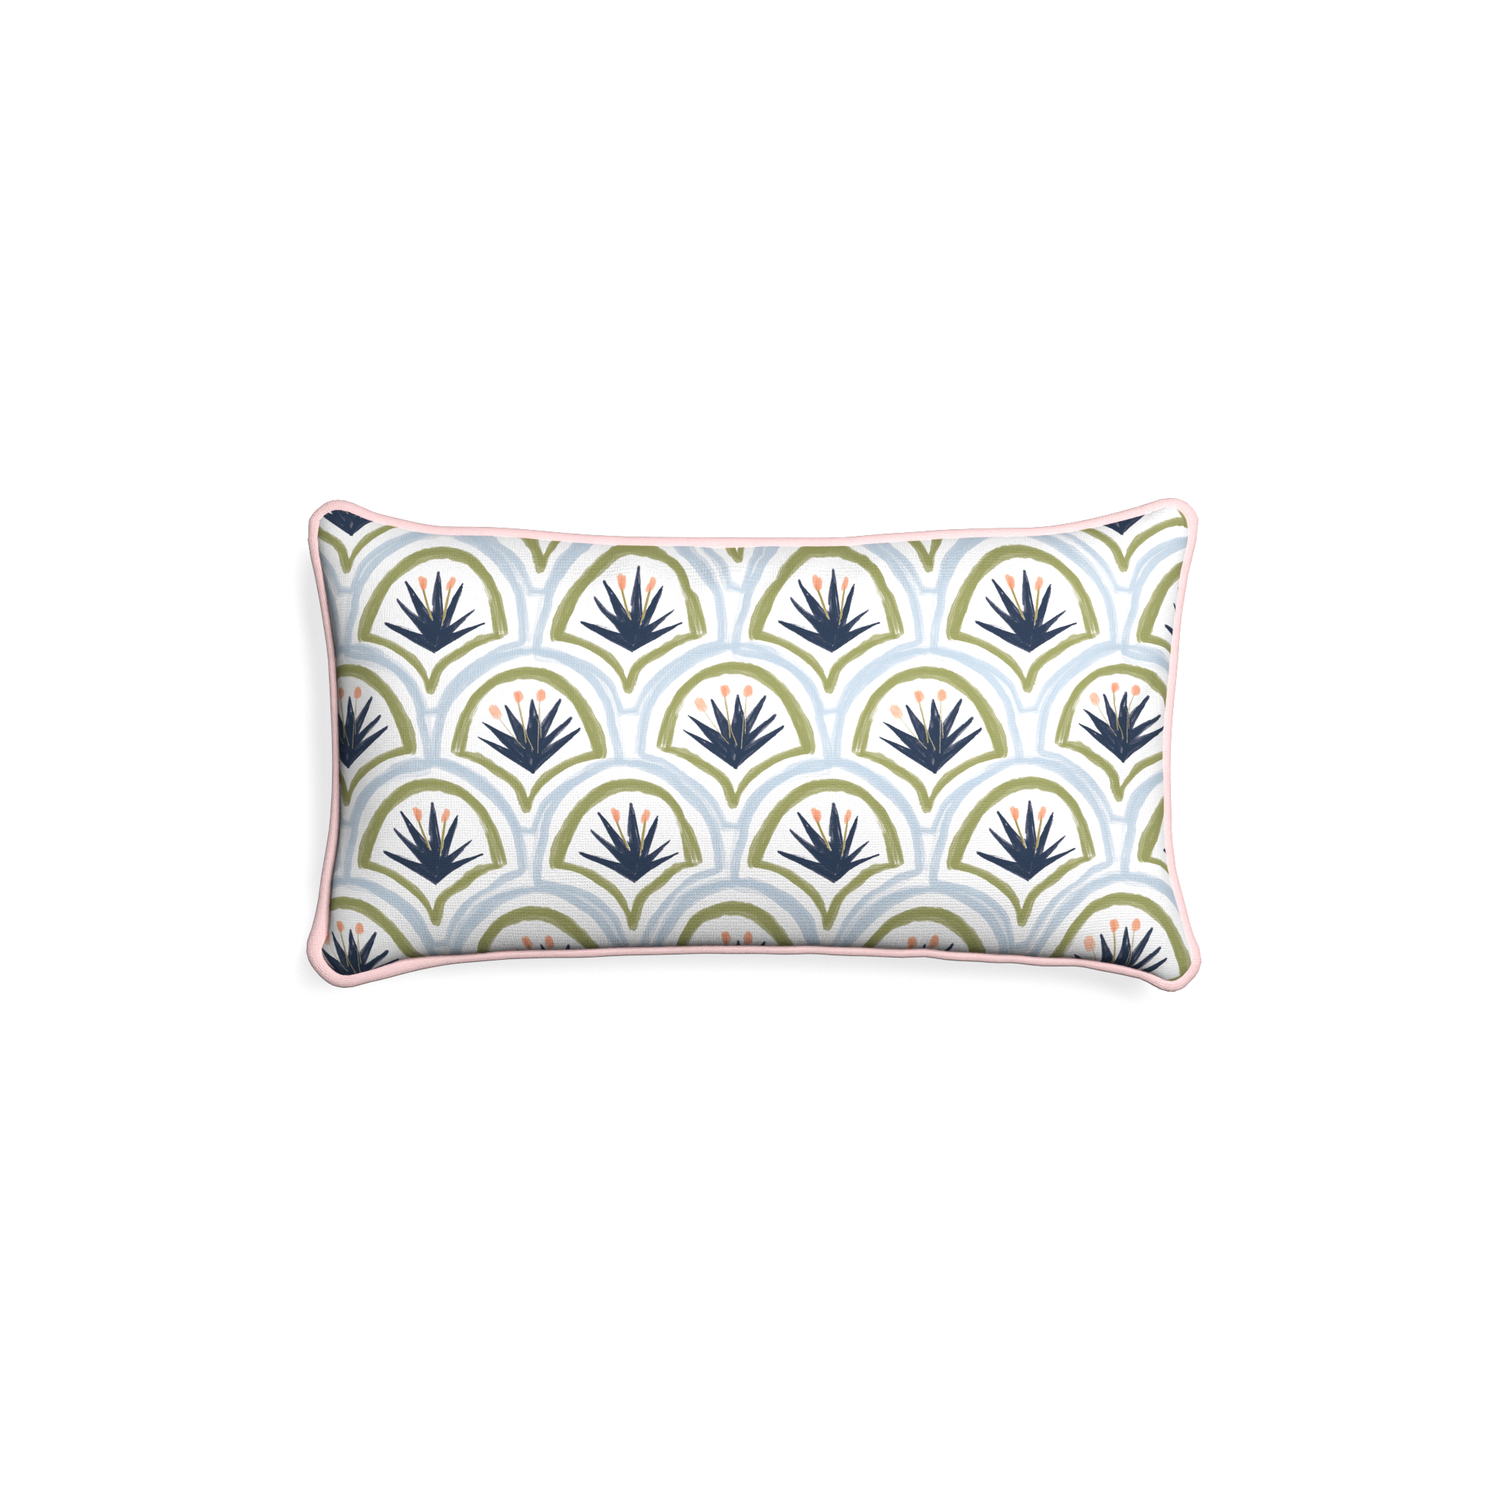 Petite-lumbar thatcher midnight custom art deco palm patternpillow with petal piping on white background